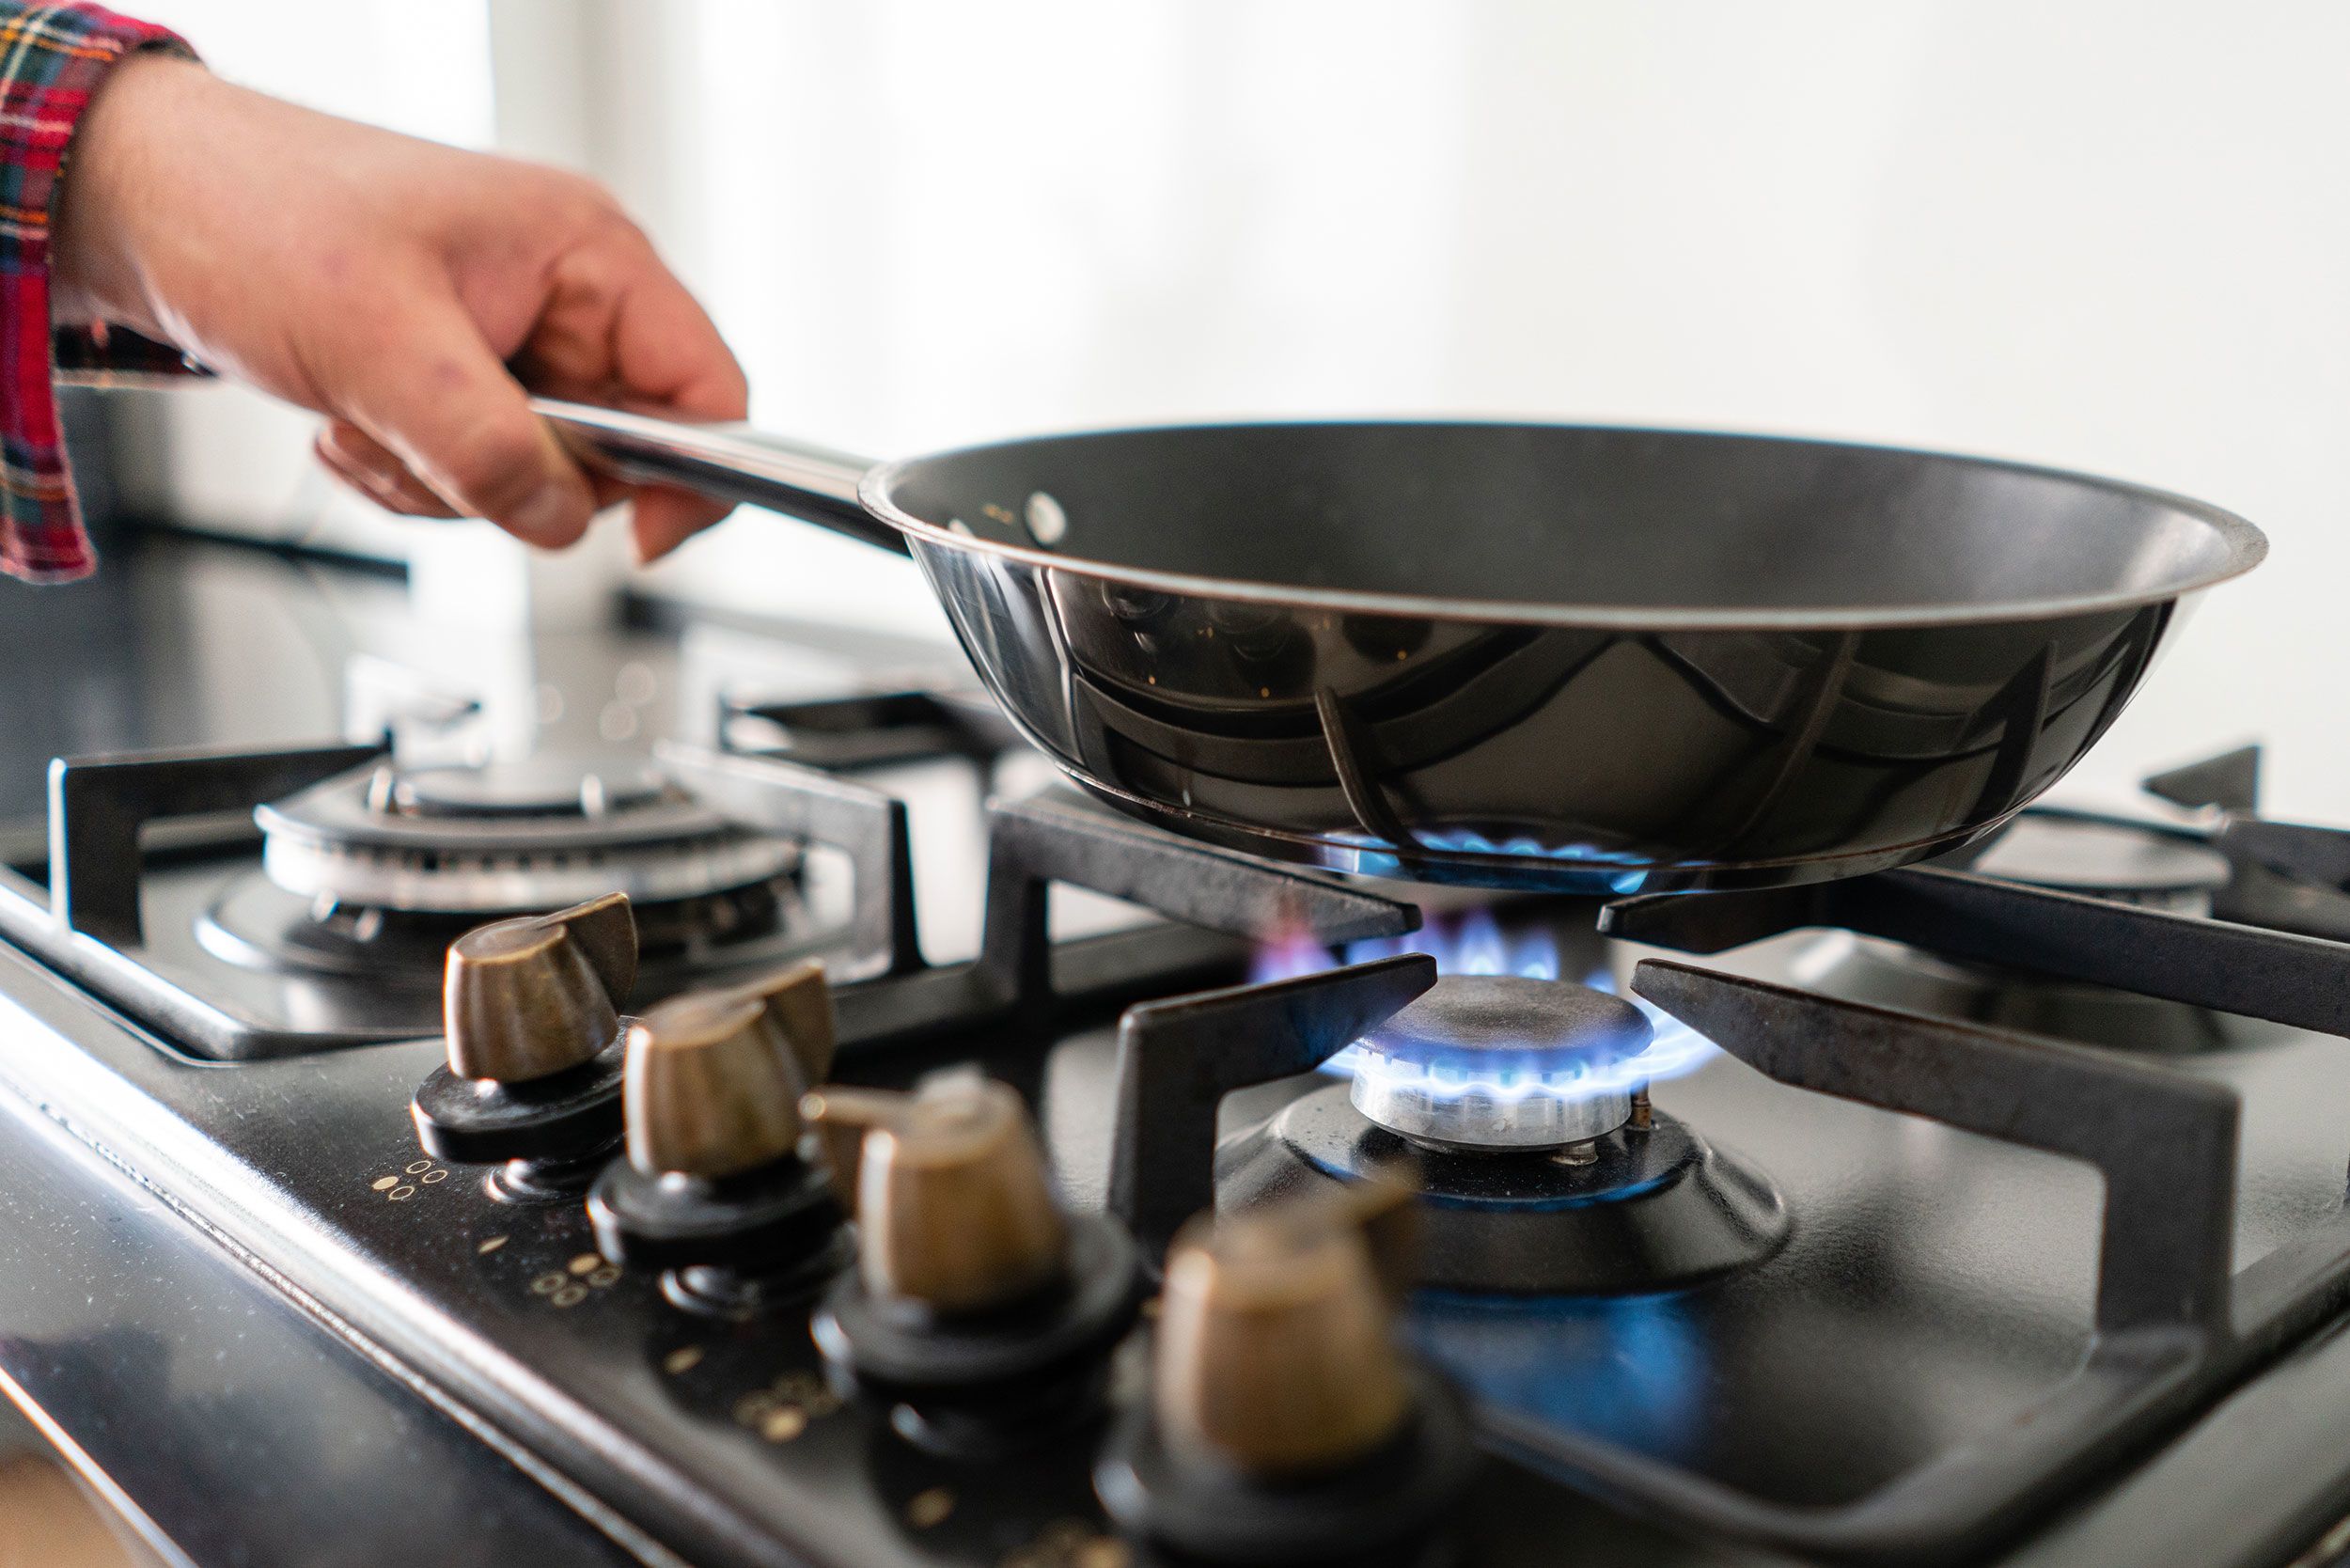 Opinion: The great gas stove debate has been reignited